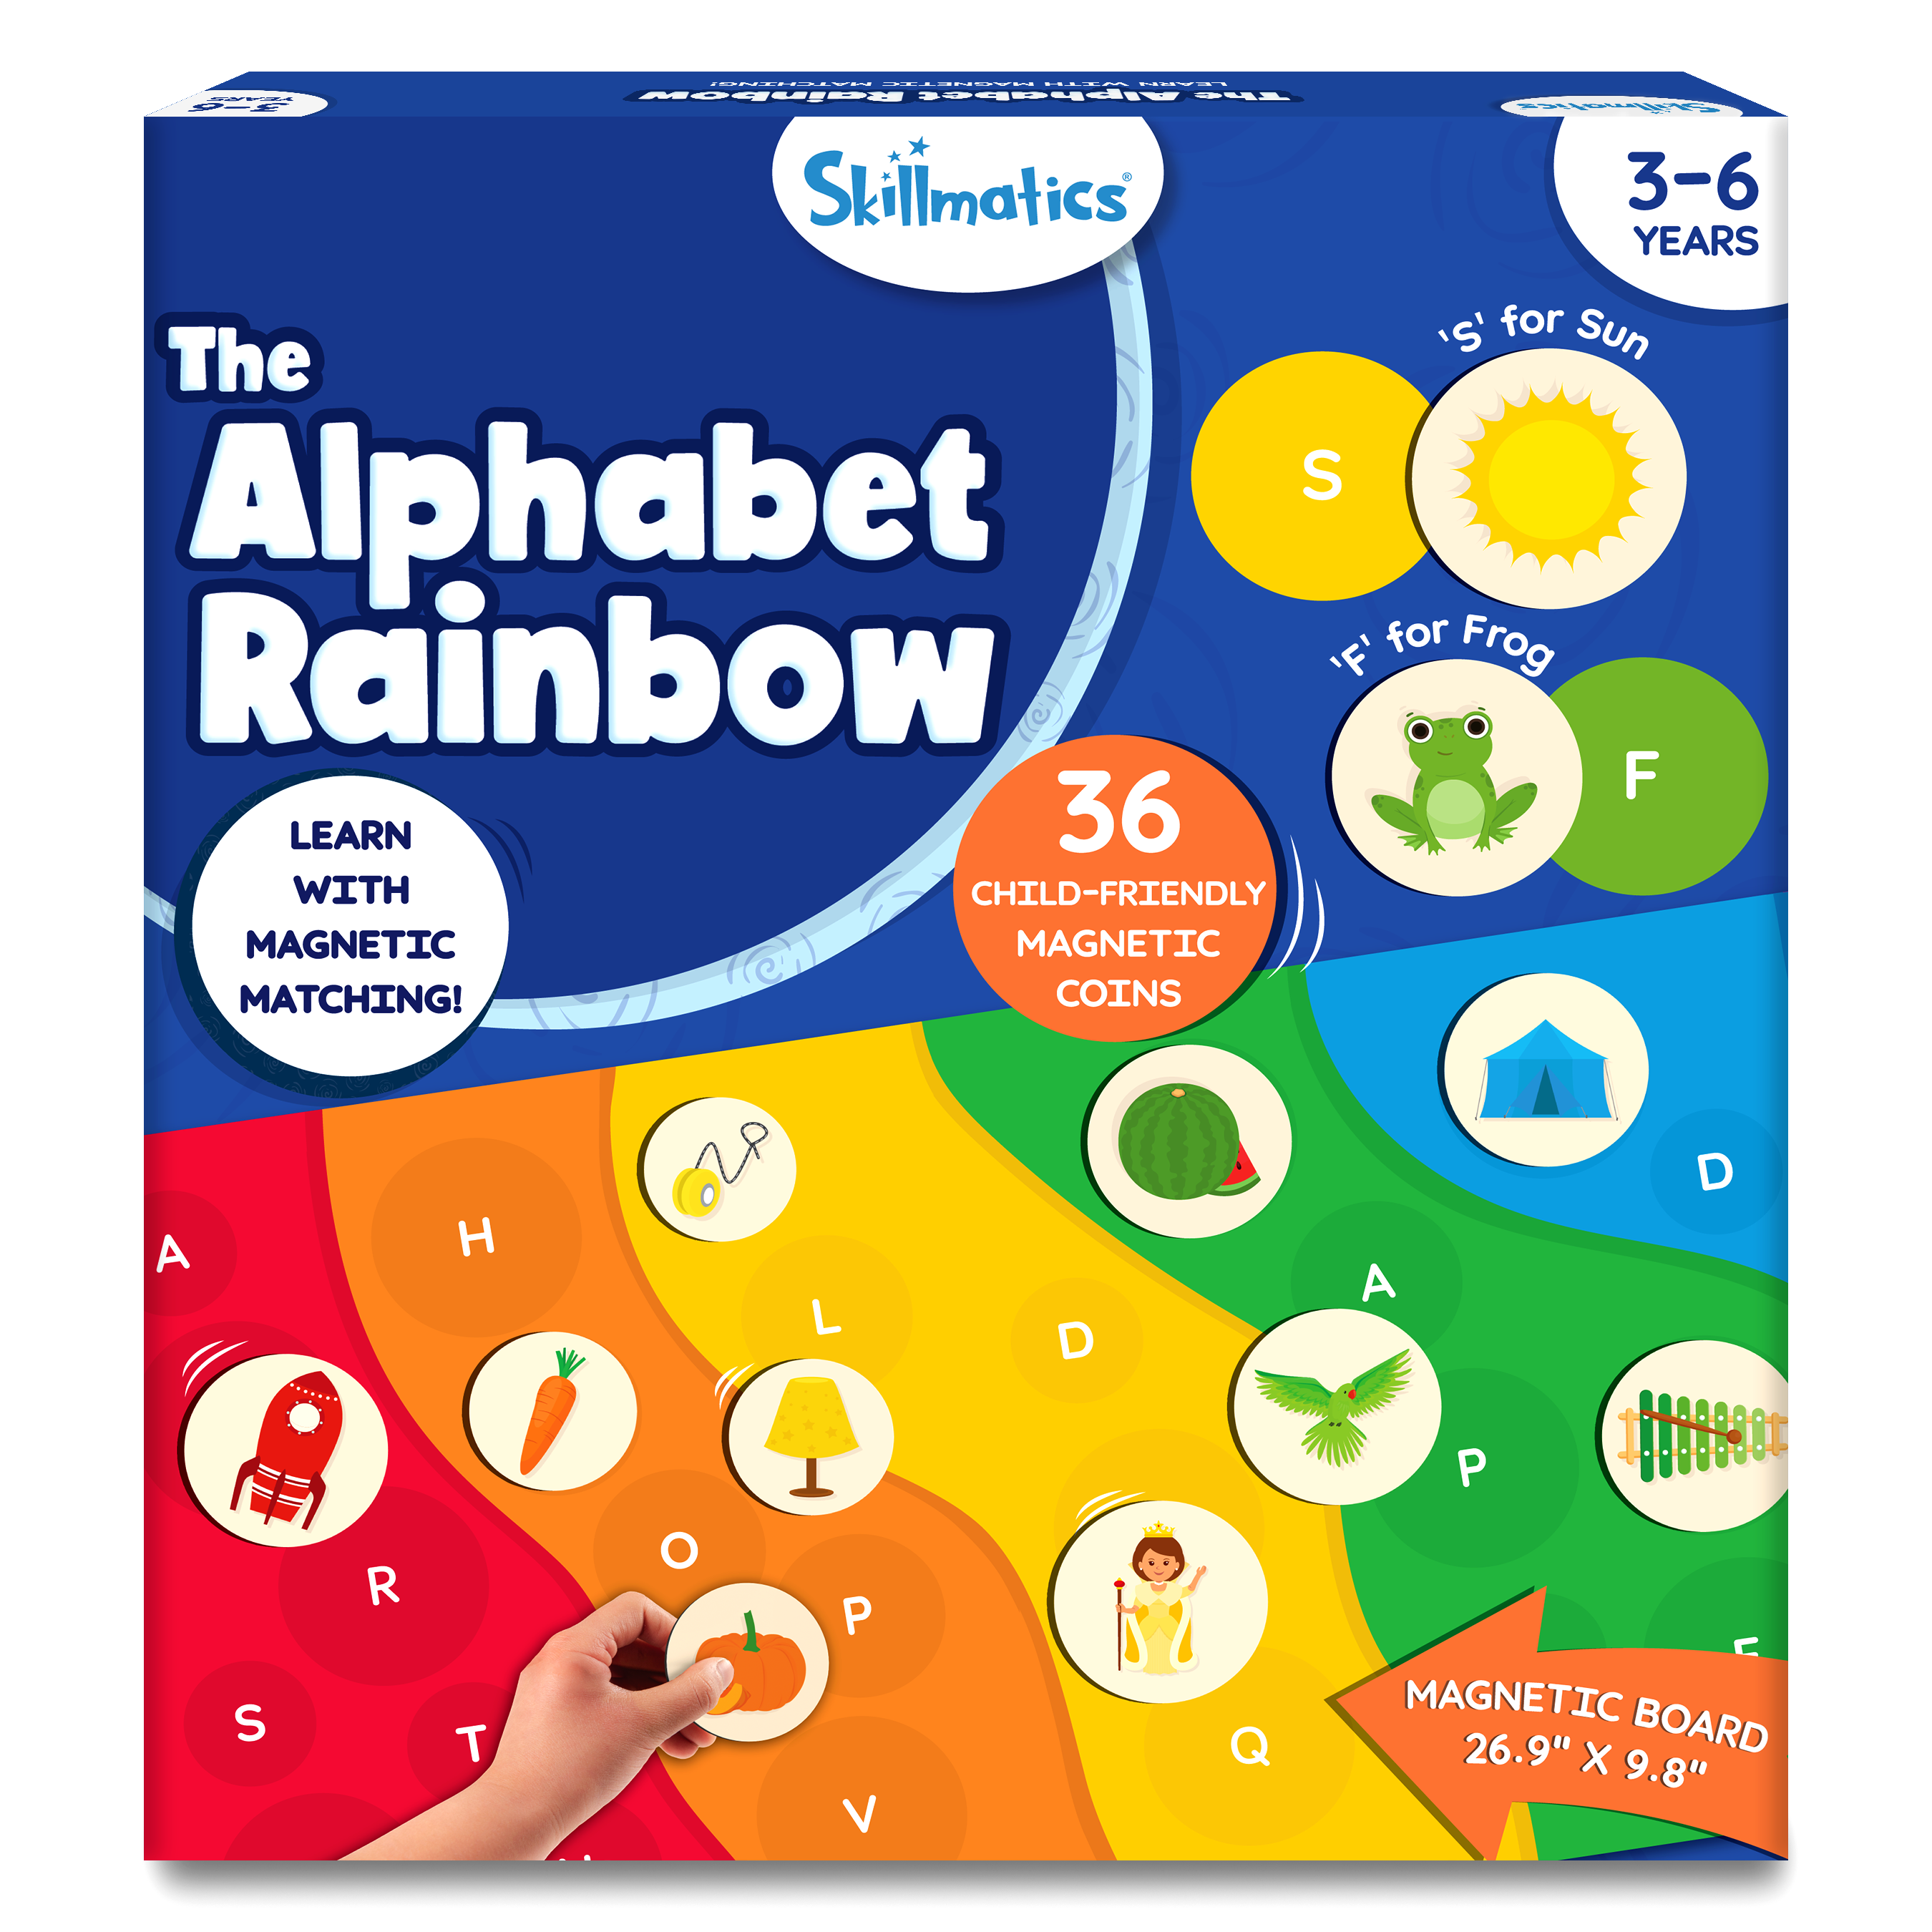 Skillmatics Magnetic Matching Activity - The Alphabet Rainbow, Preschool Learning Toy & Game for Kids, 35+ Magnetic Pieces, Gifts for Girls & Boys Ages 3, 4, 5, 6